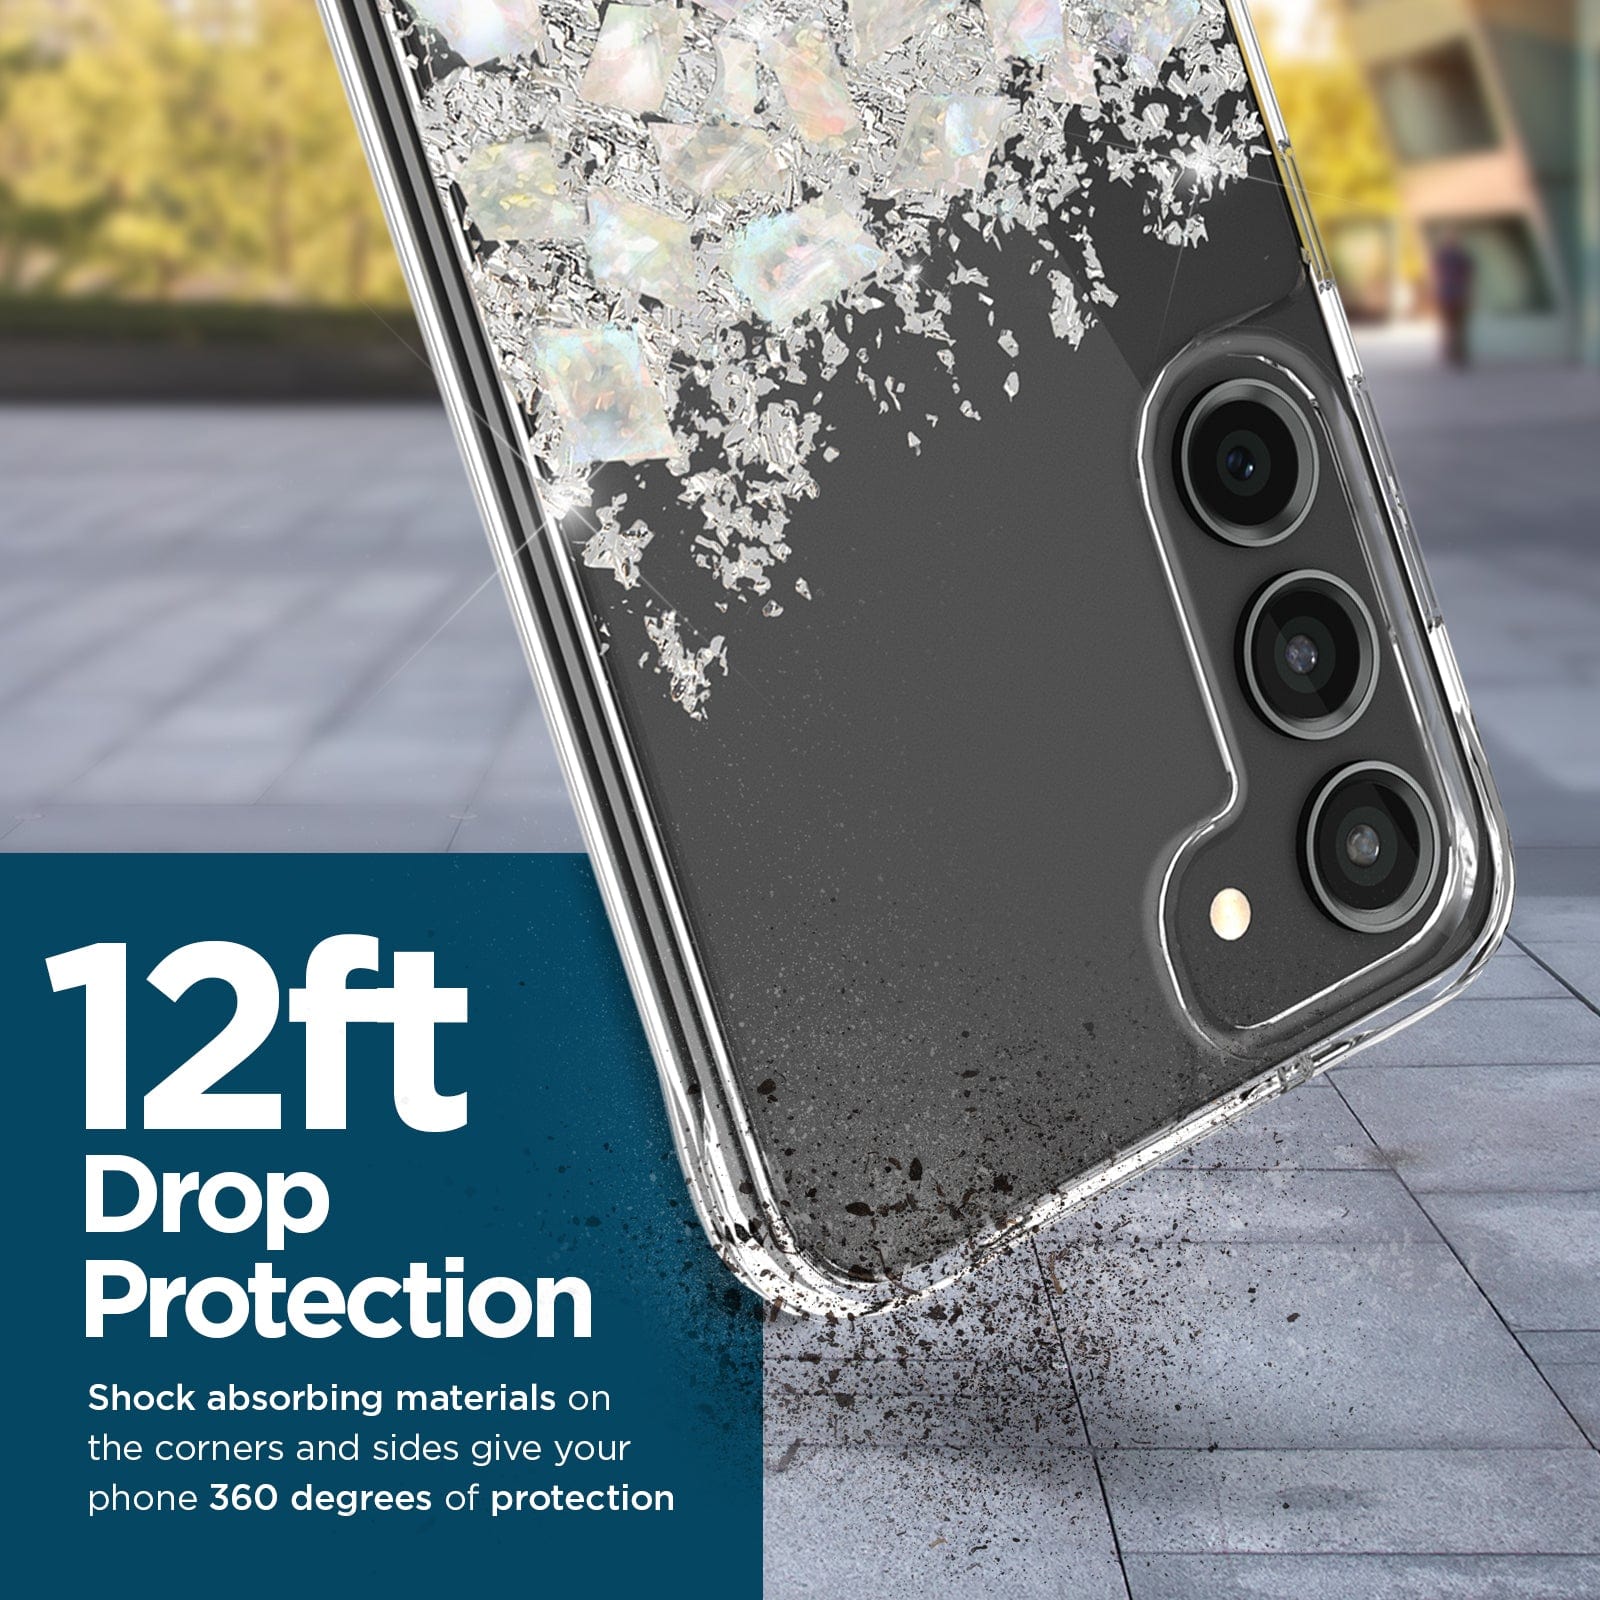 12ft DROP PROTECTION. SHOCK ABSORBING MATERIALS ON THE CORNERS AND SIDES GIVE YOUR PHONE 360 DEGREES OF PROTECTION. 